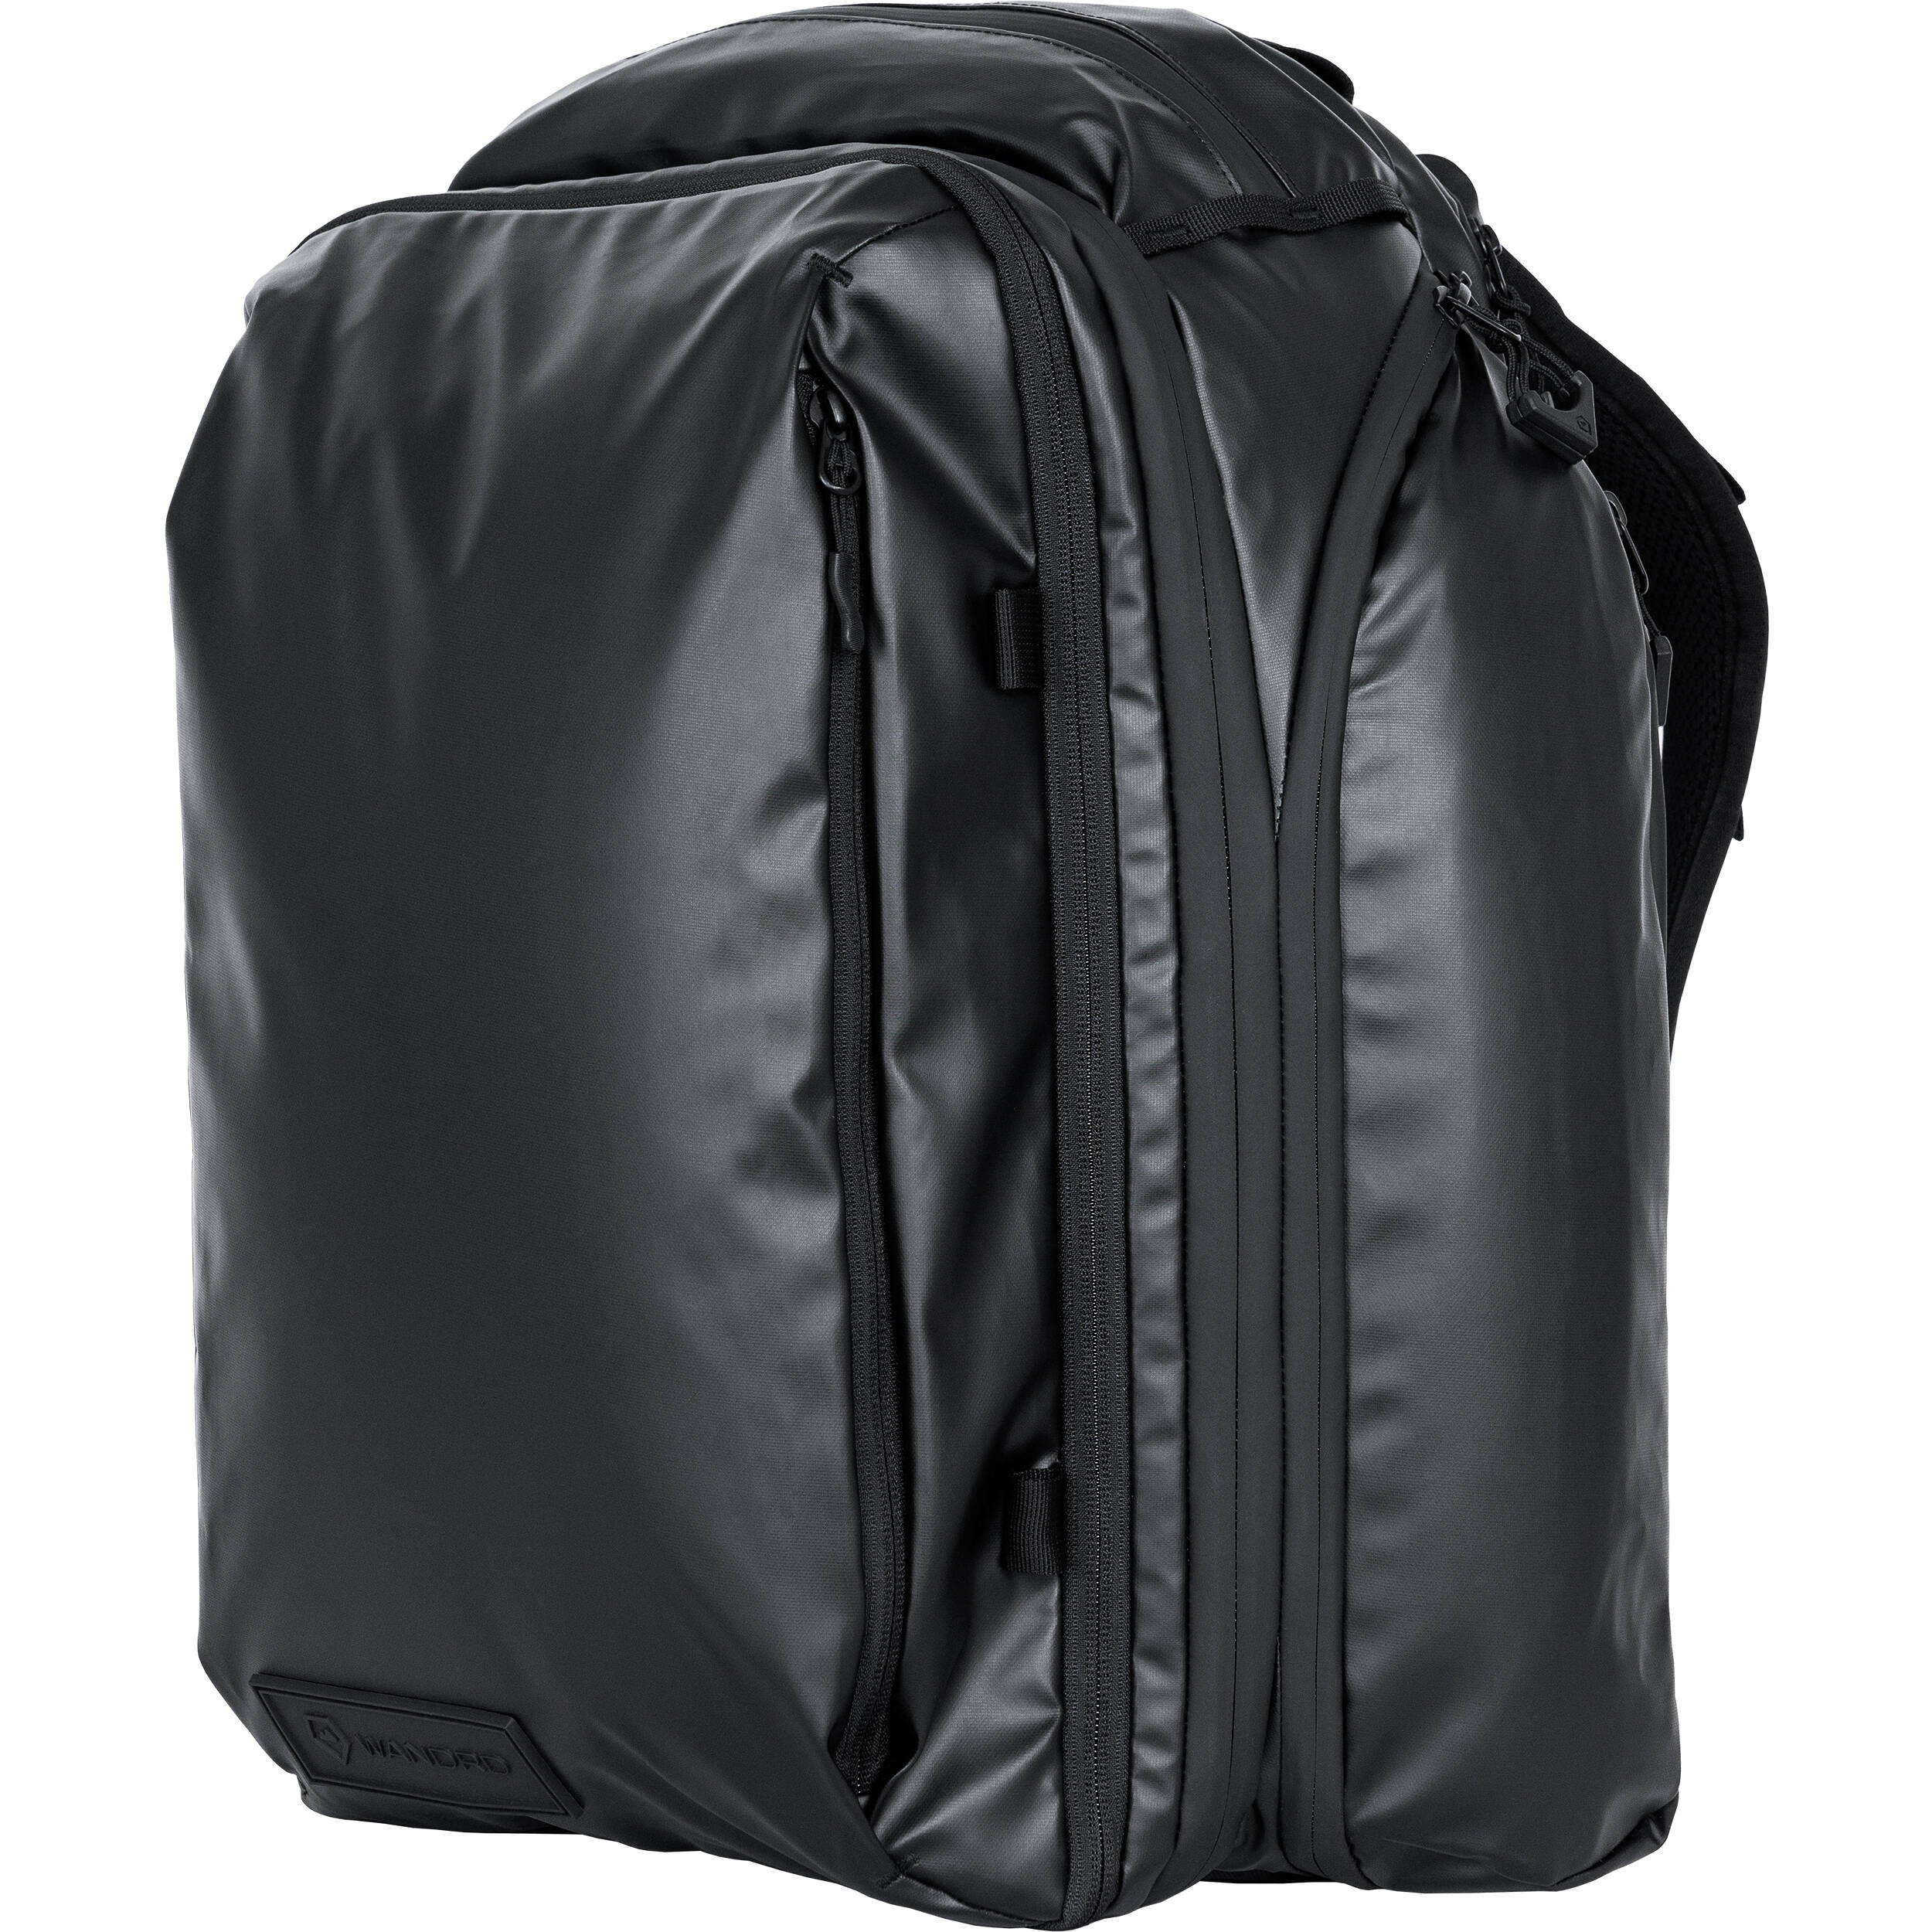 WANDRD Transit Travel Backpack - 35L - Black - with Essential Camera Cube